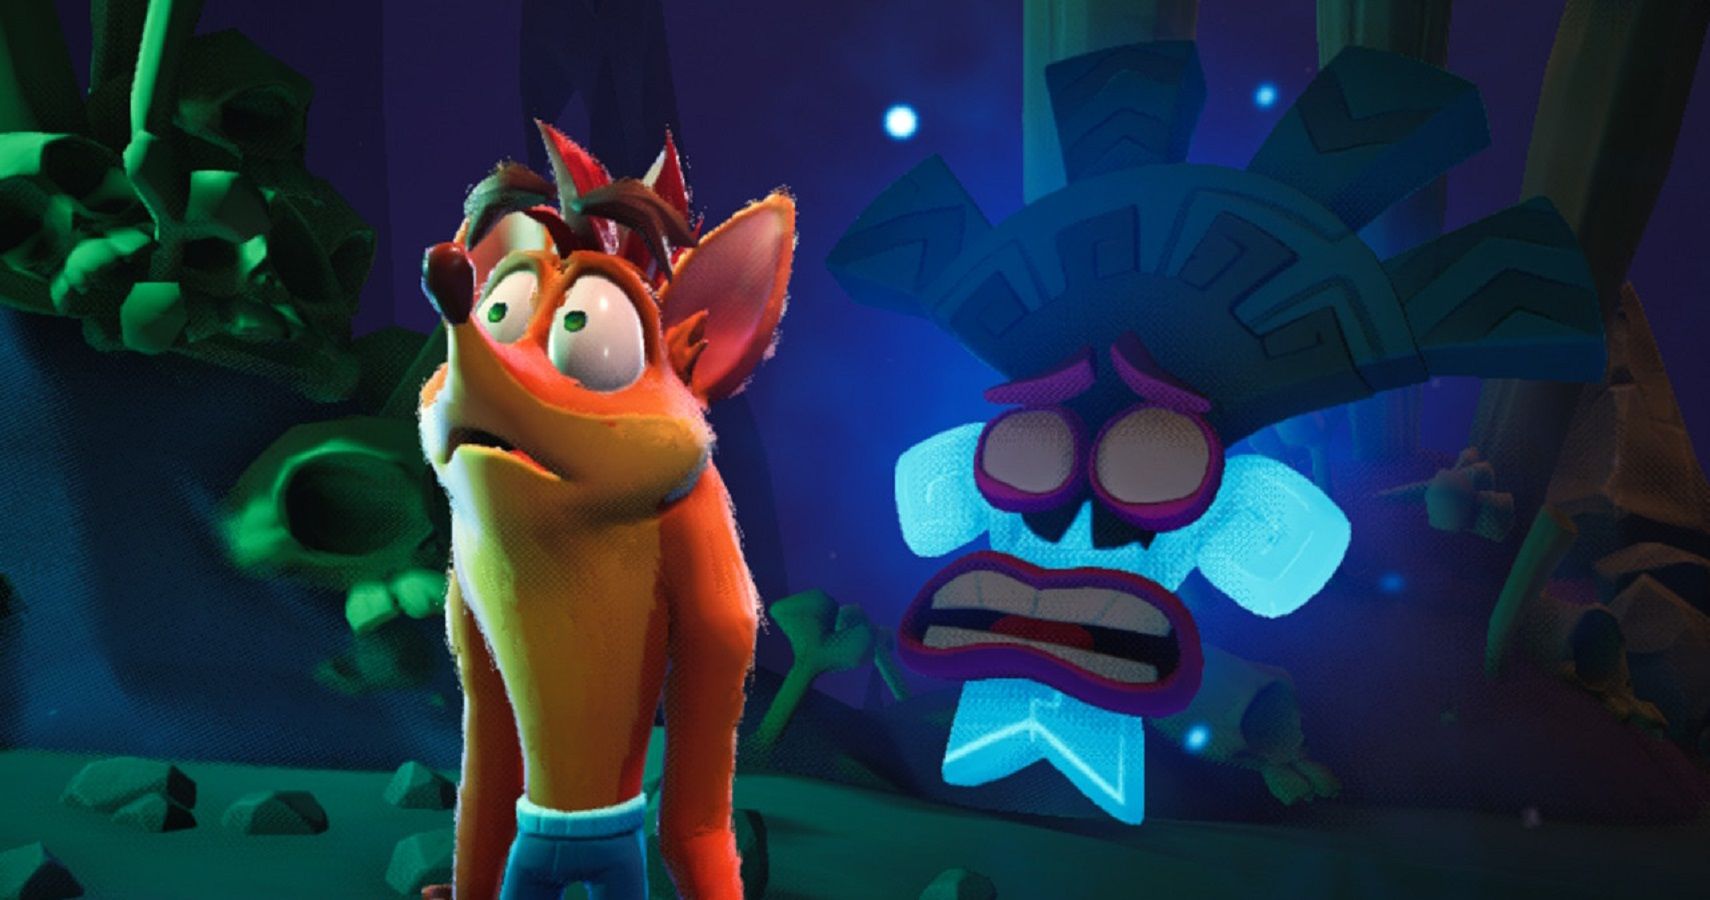 Crash Bandicoot 4: It's About Time' review: Classic platforming